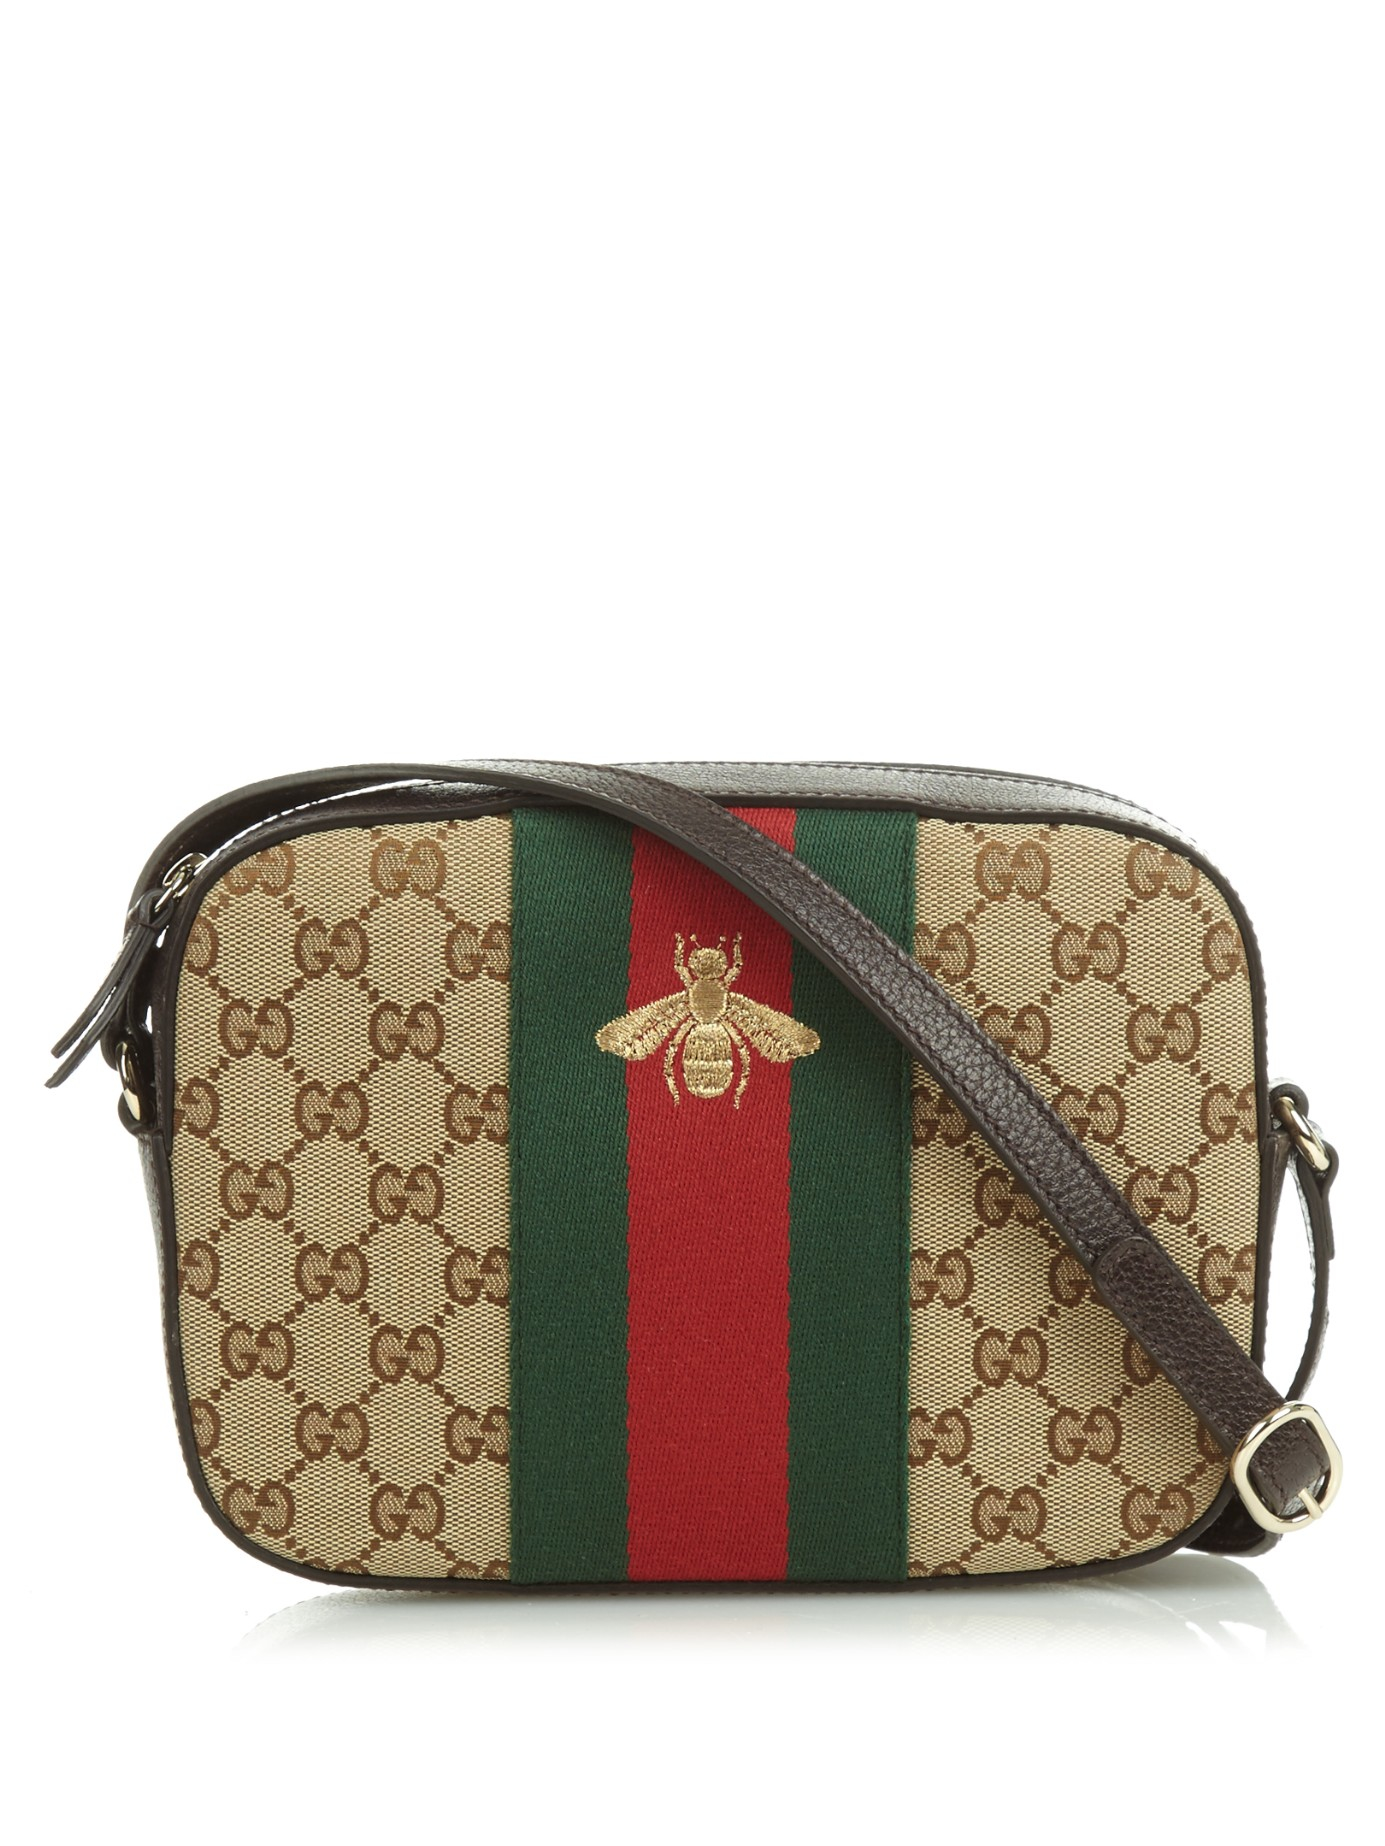 Lyst - Gucci Line Gg Canvas And Leather Cross-body Bag in Brown